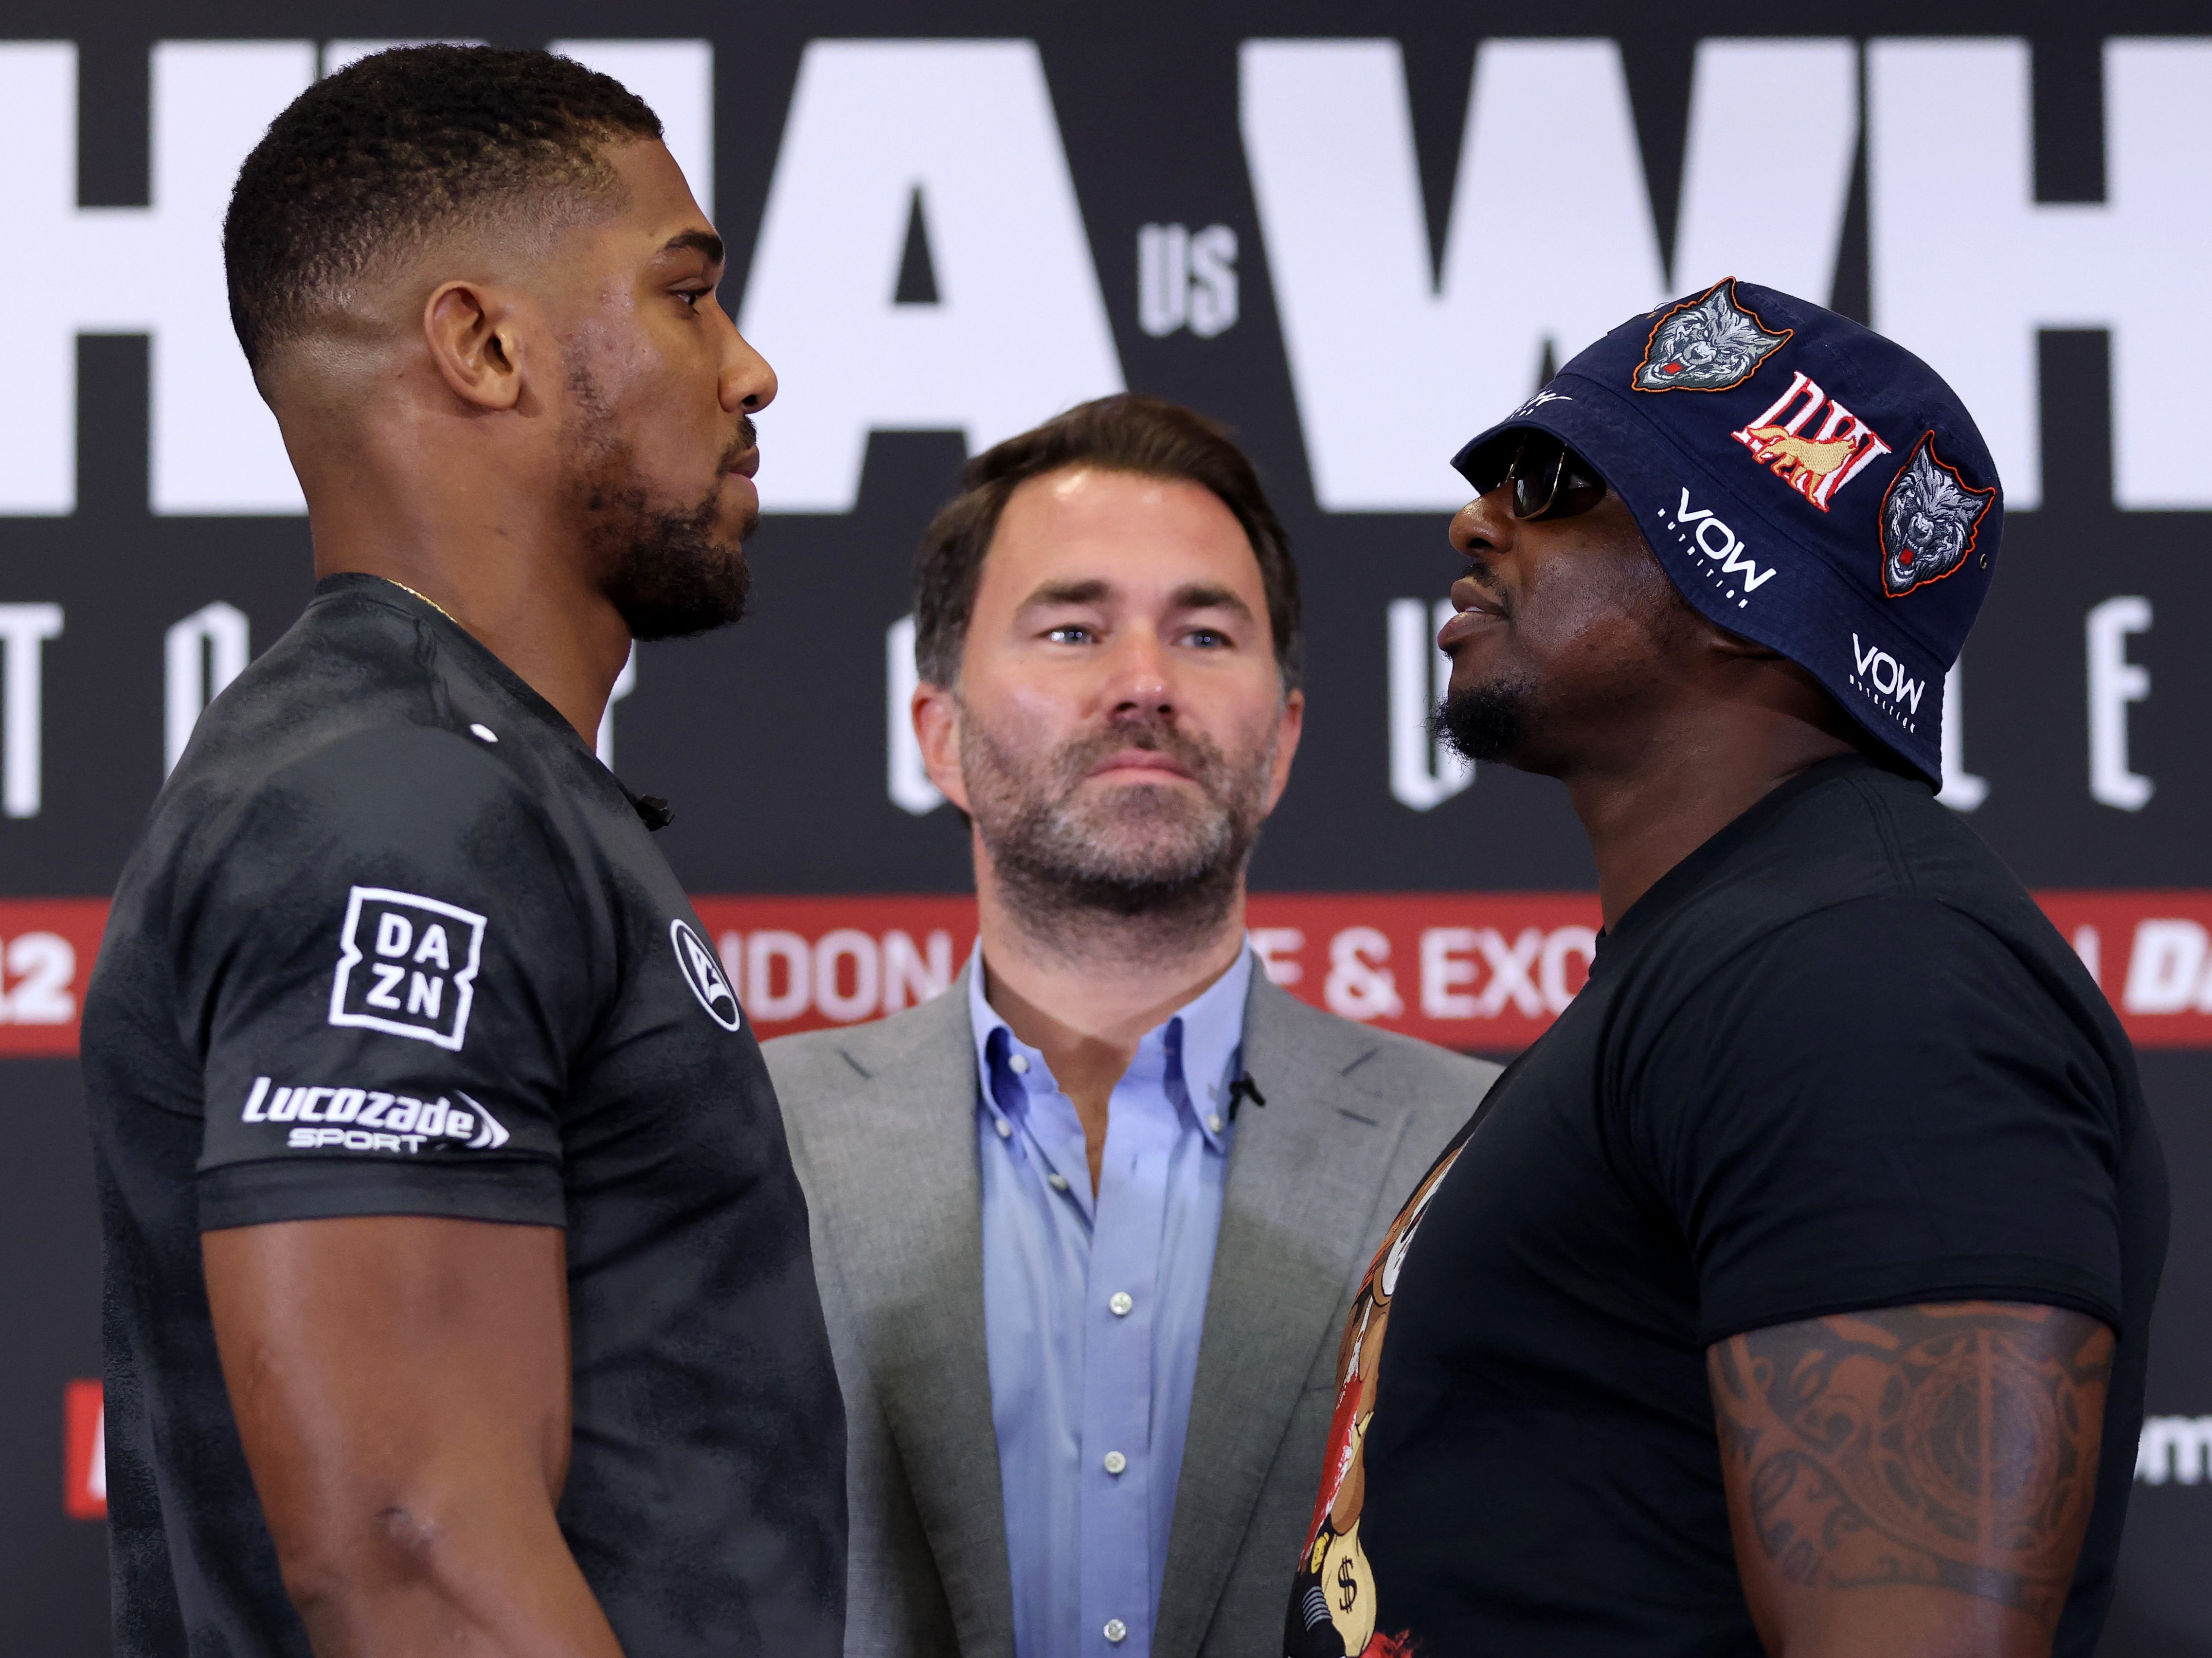 Anthony Joshua and Dillian Whyte’s fight is off